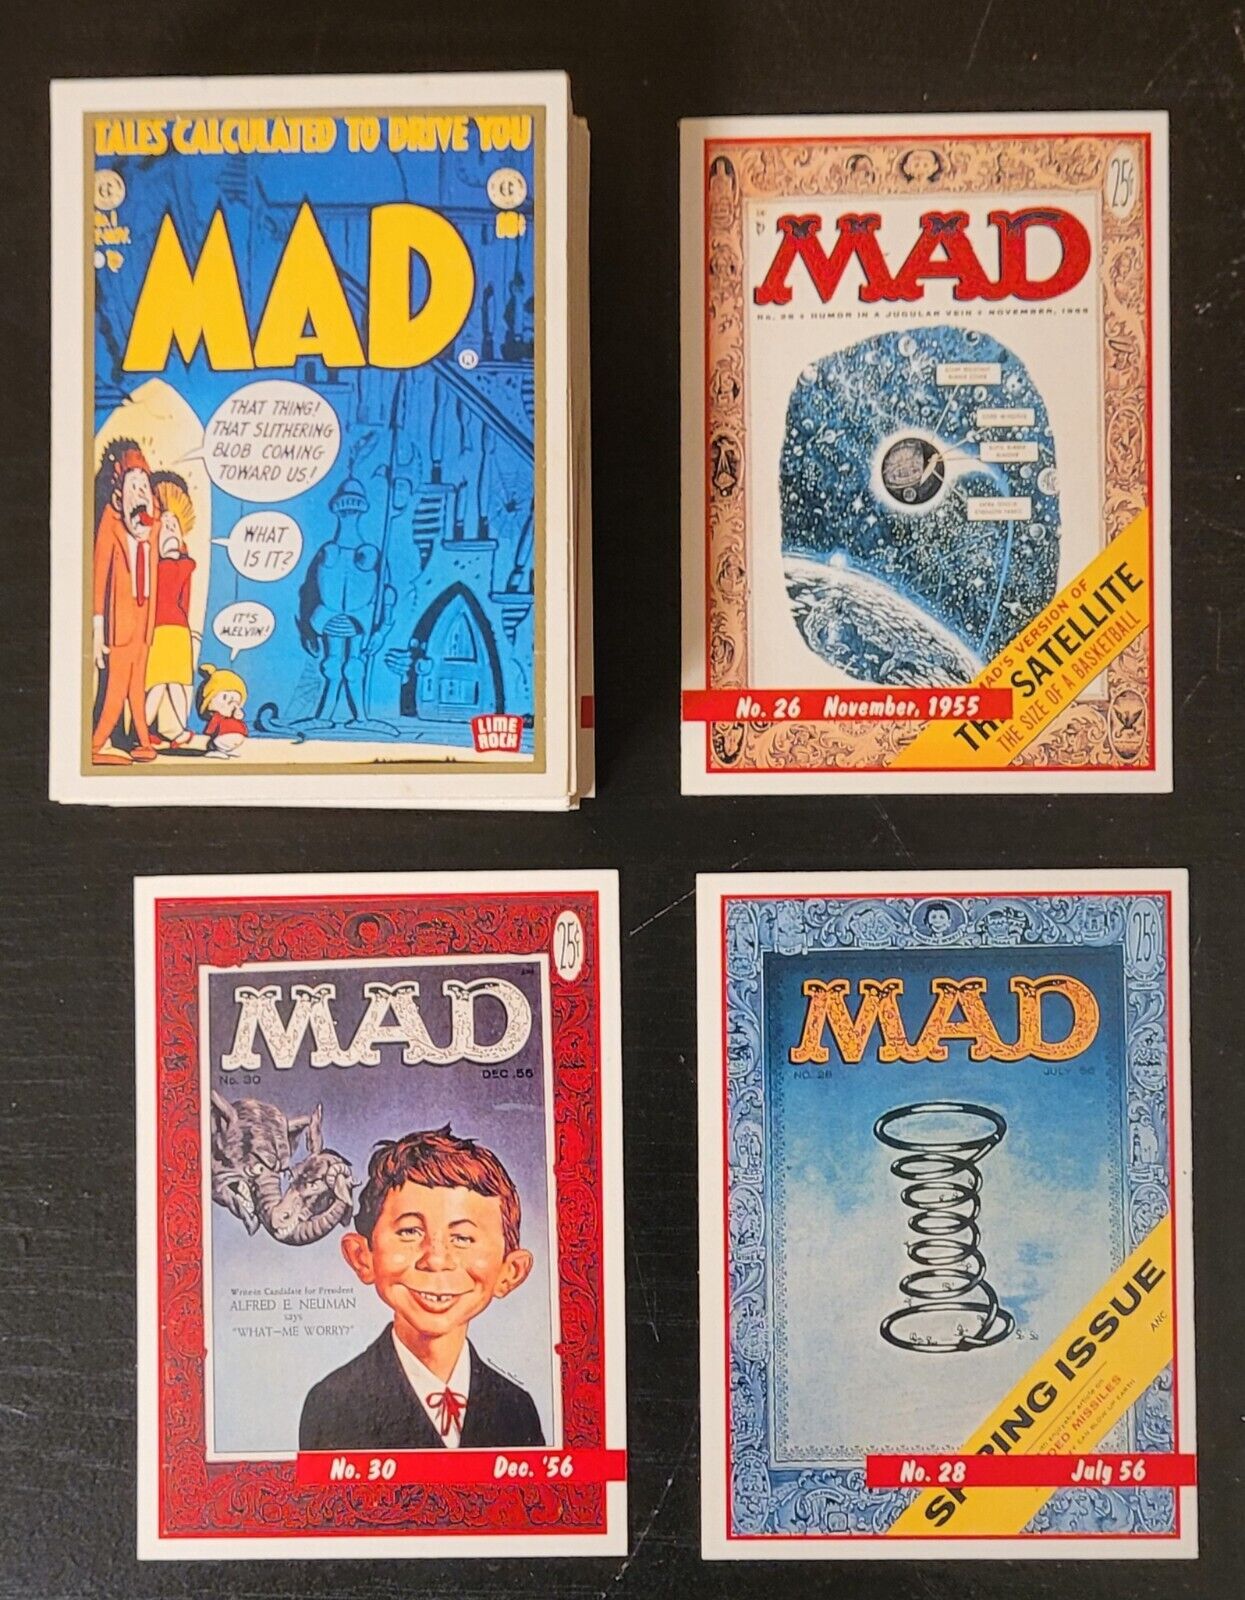 1992 LIME ROCK MAD MAGAZINE TRADING CARDS SERIES 1 COMPLETE SET - 55 CARDS